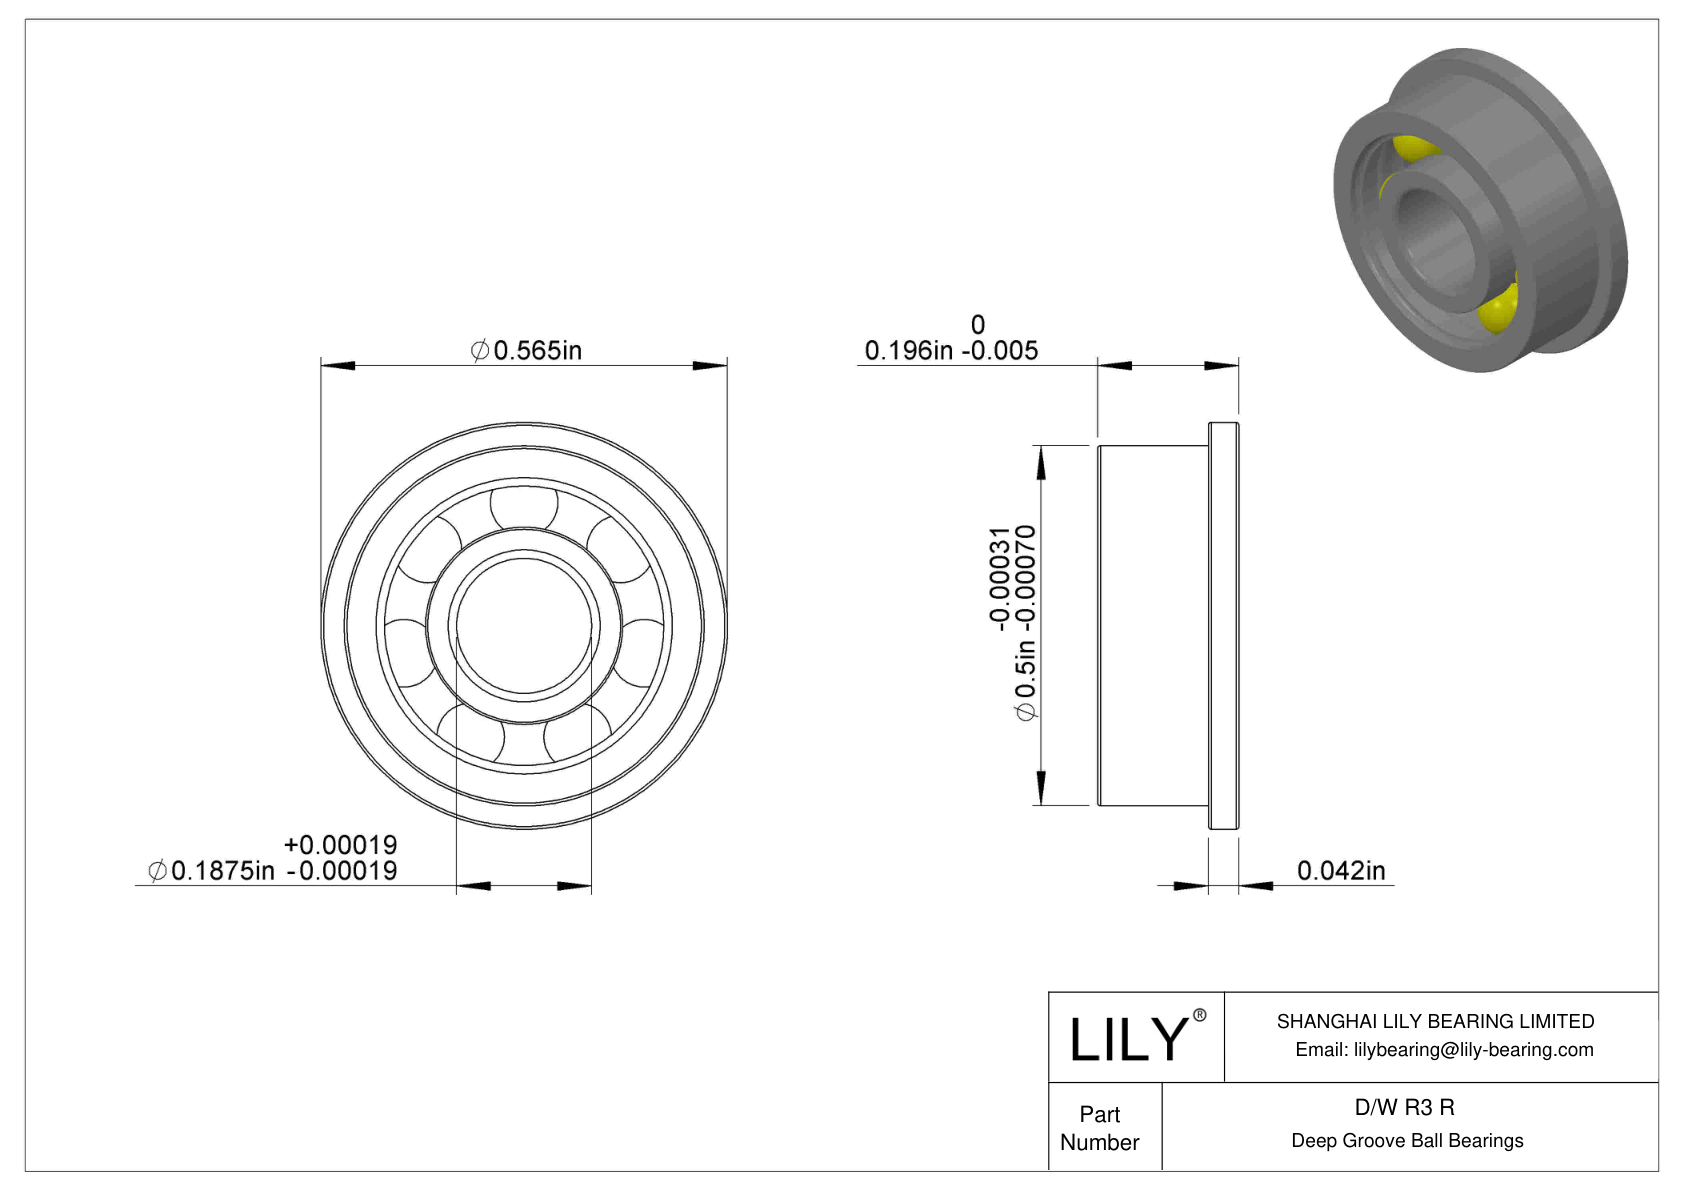 D/W R3 R Flanged Ball Bearings cad drawing